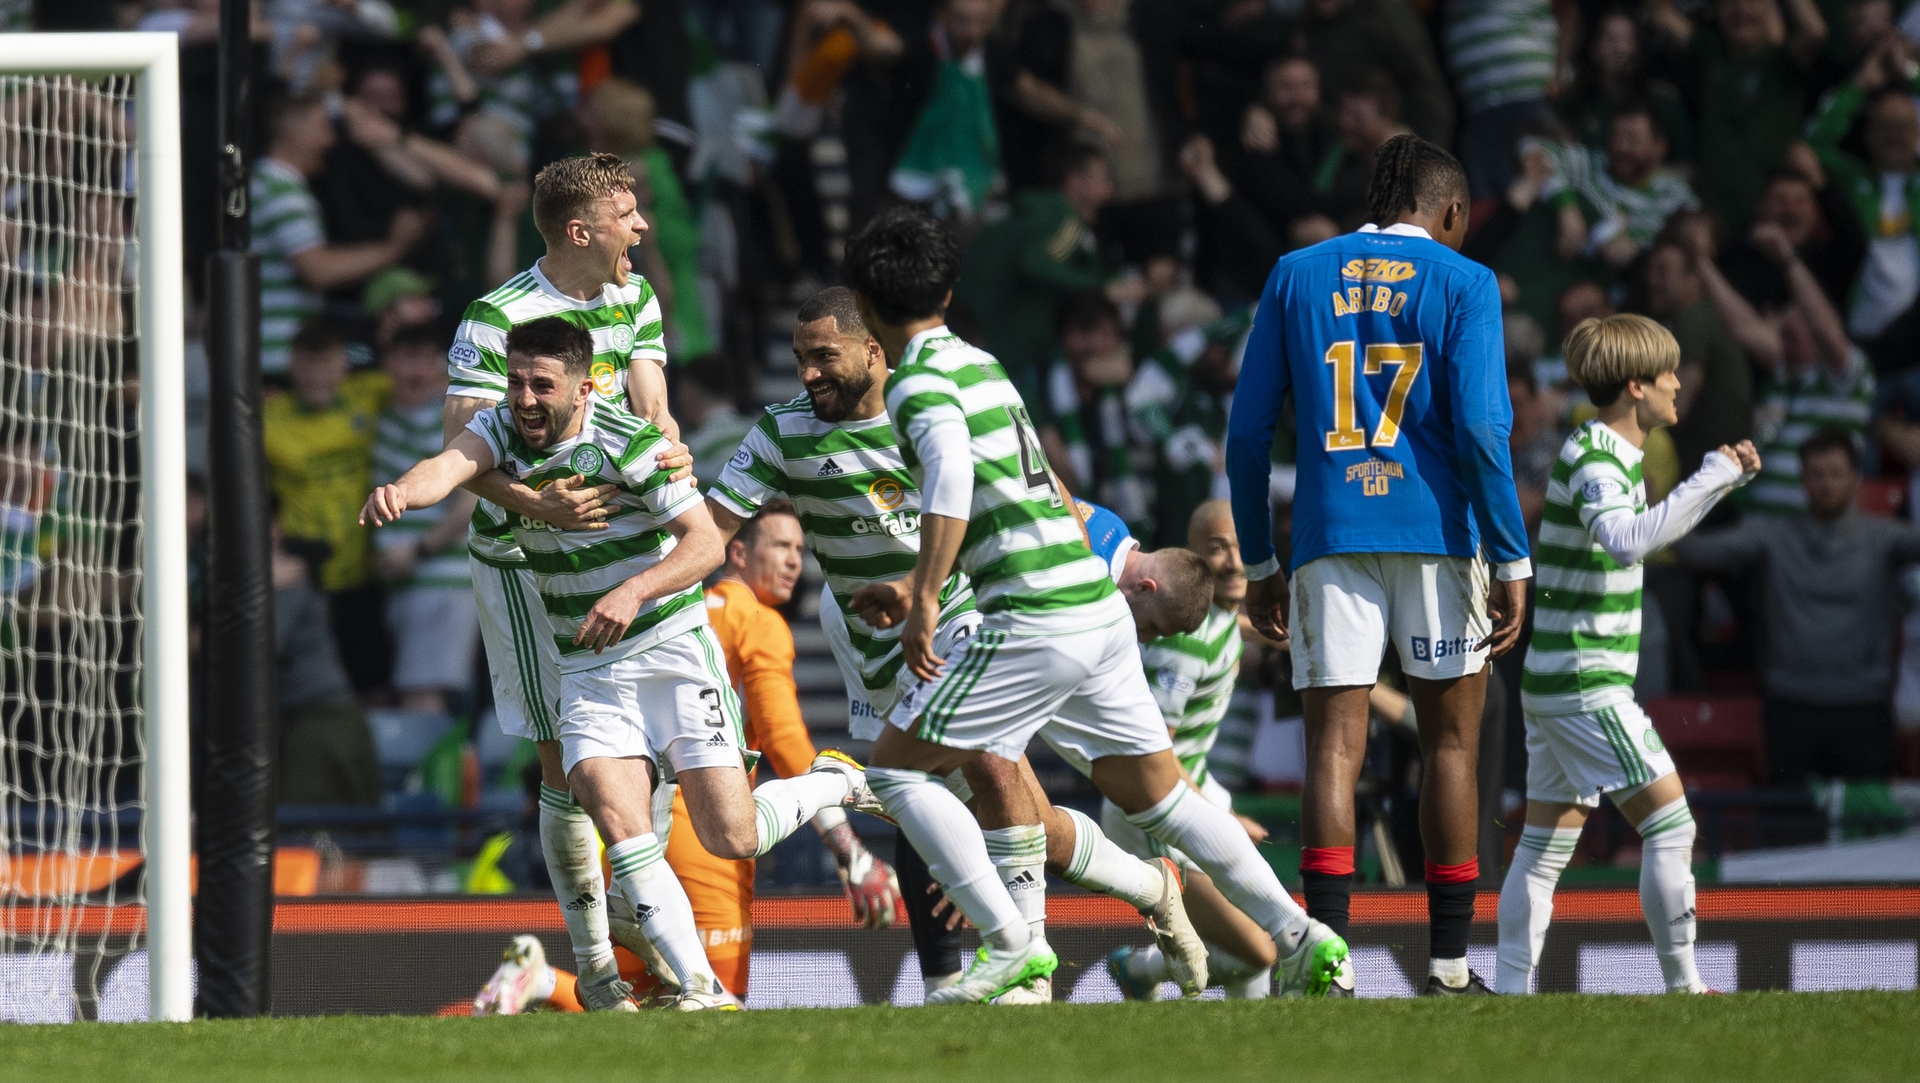 Greg Taylor had given Celtic the lead at Hampden. (Photo by Ross MacDonald / SNS Group)